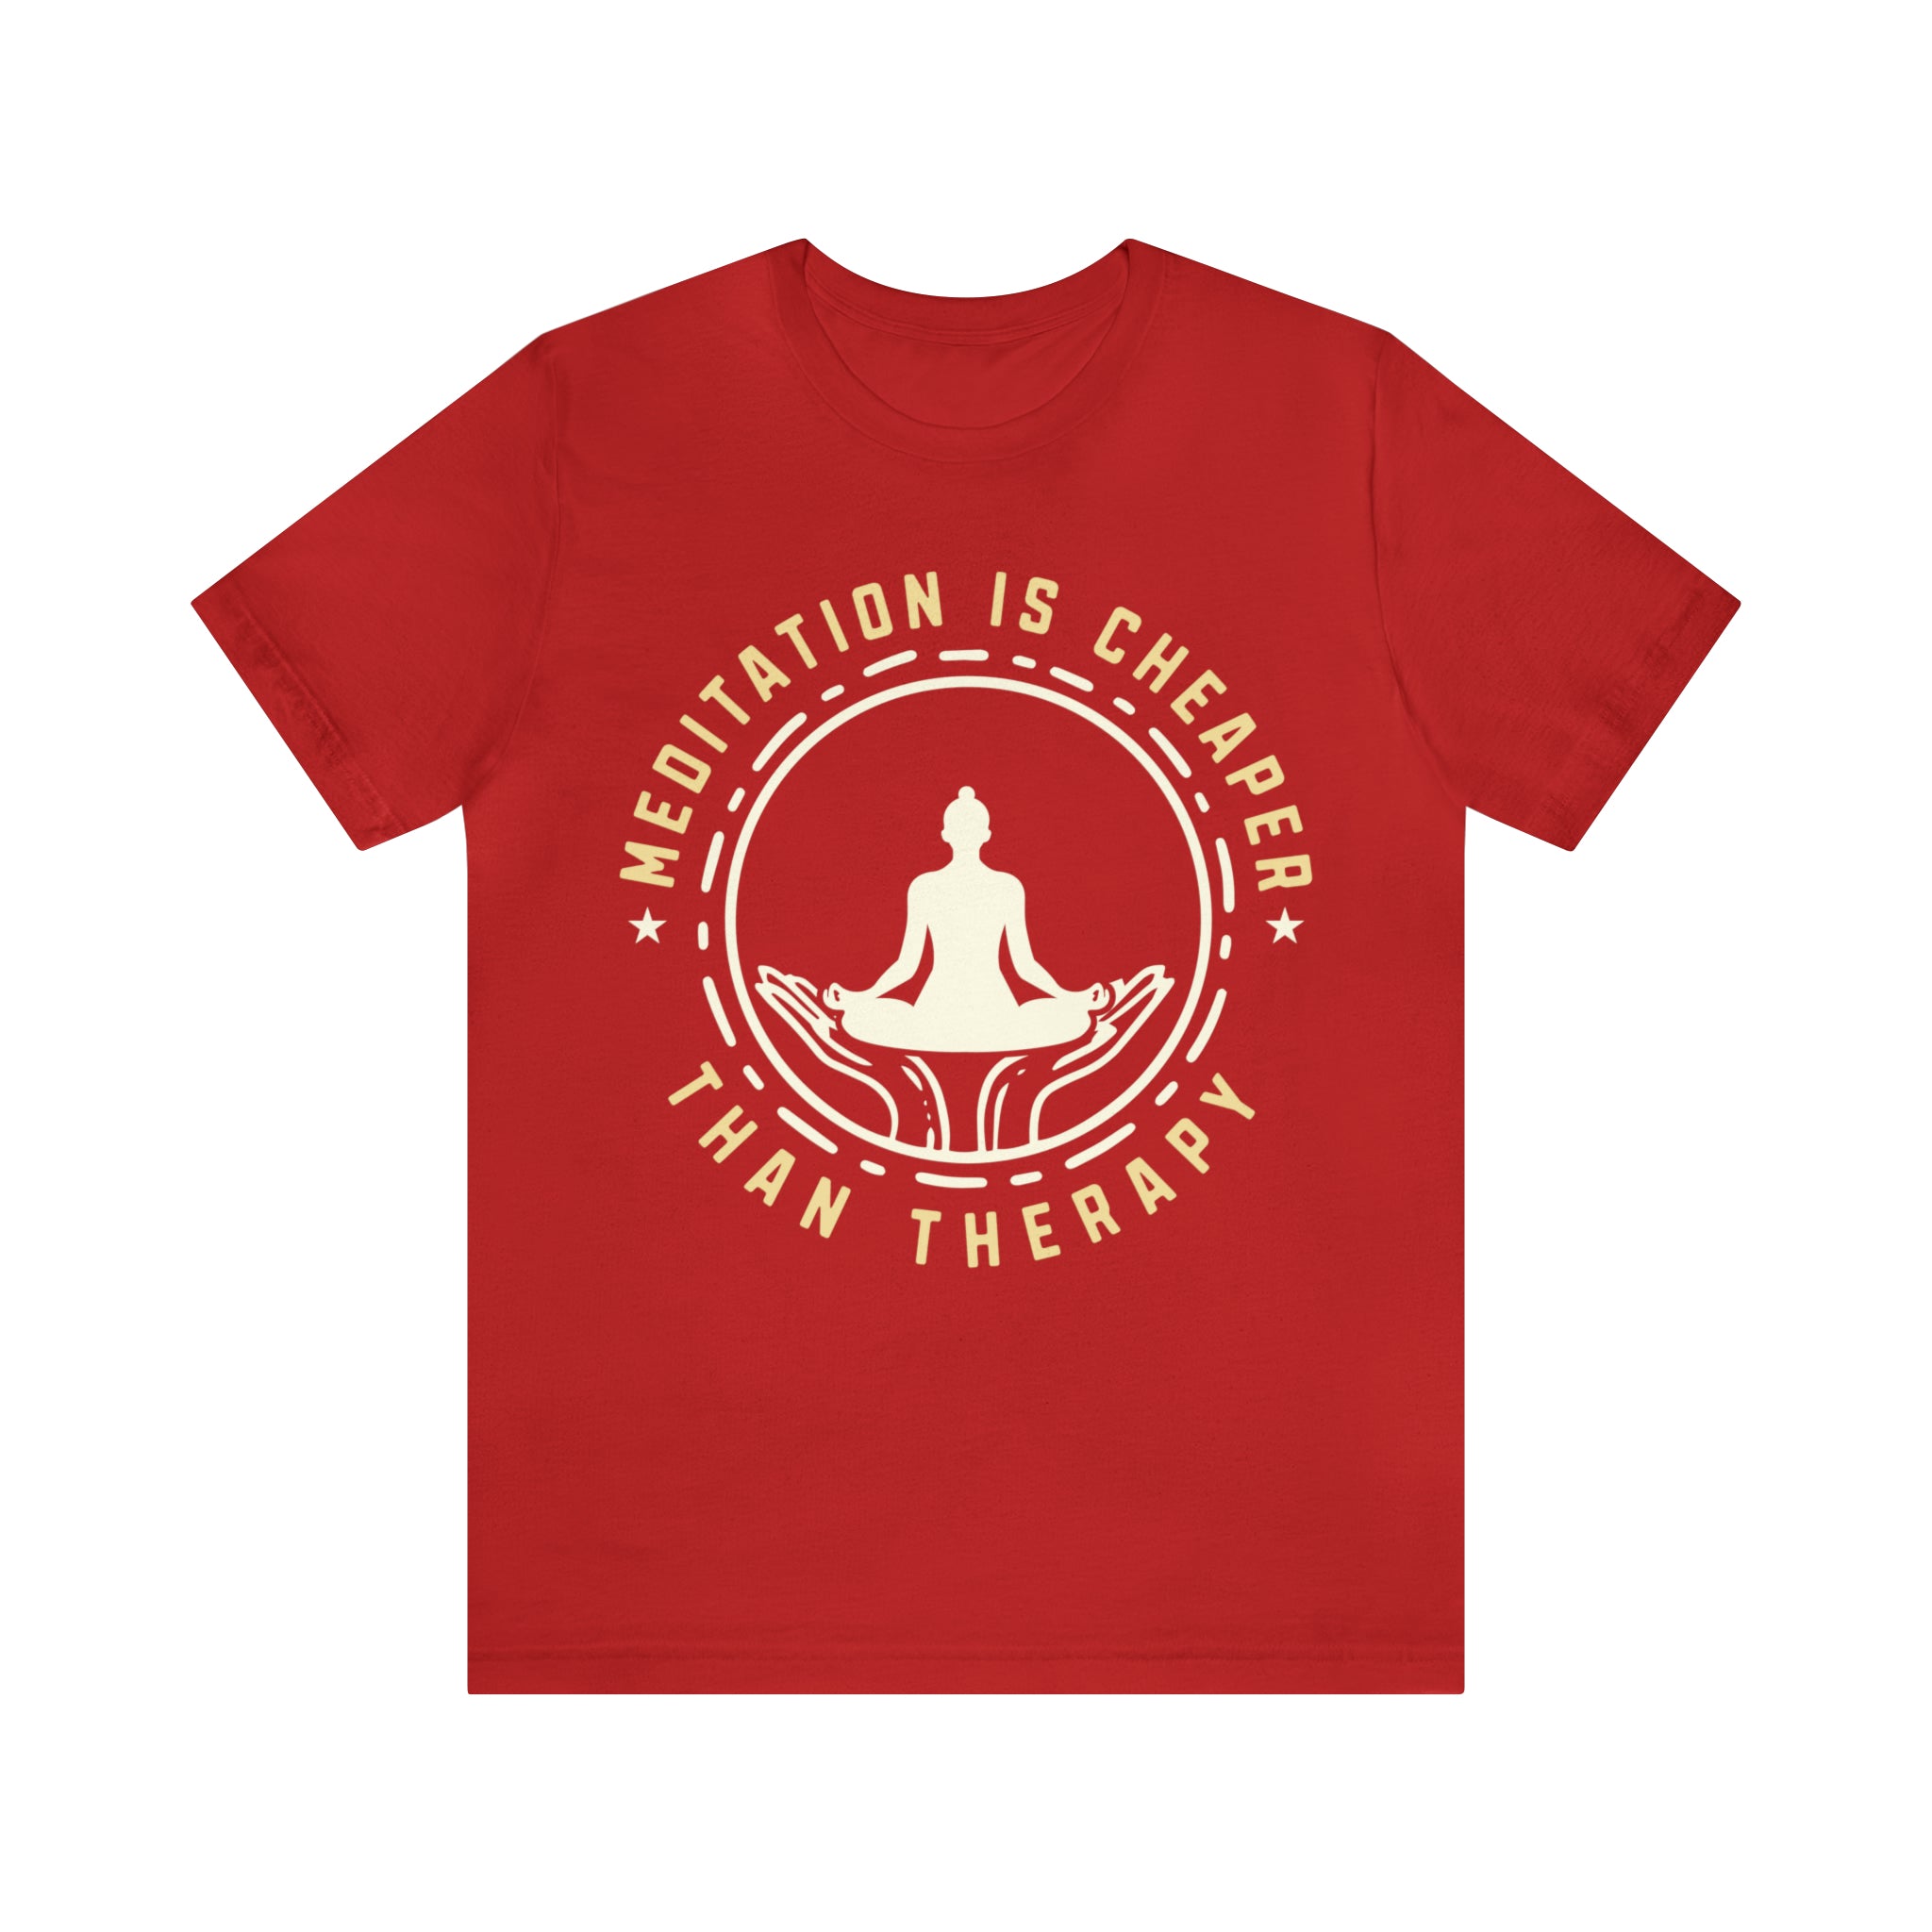 Meditation is Cheaper Than Therapy Short Sleeve Tee